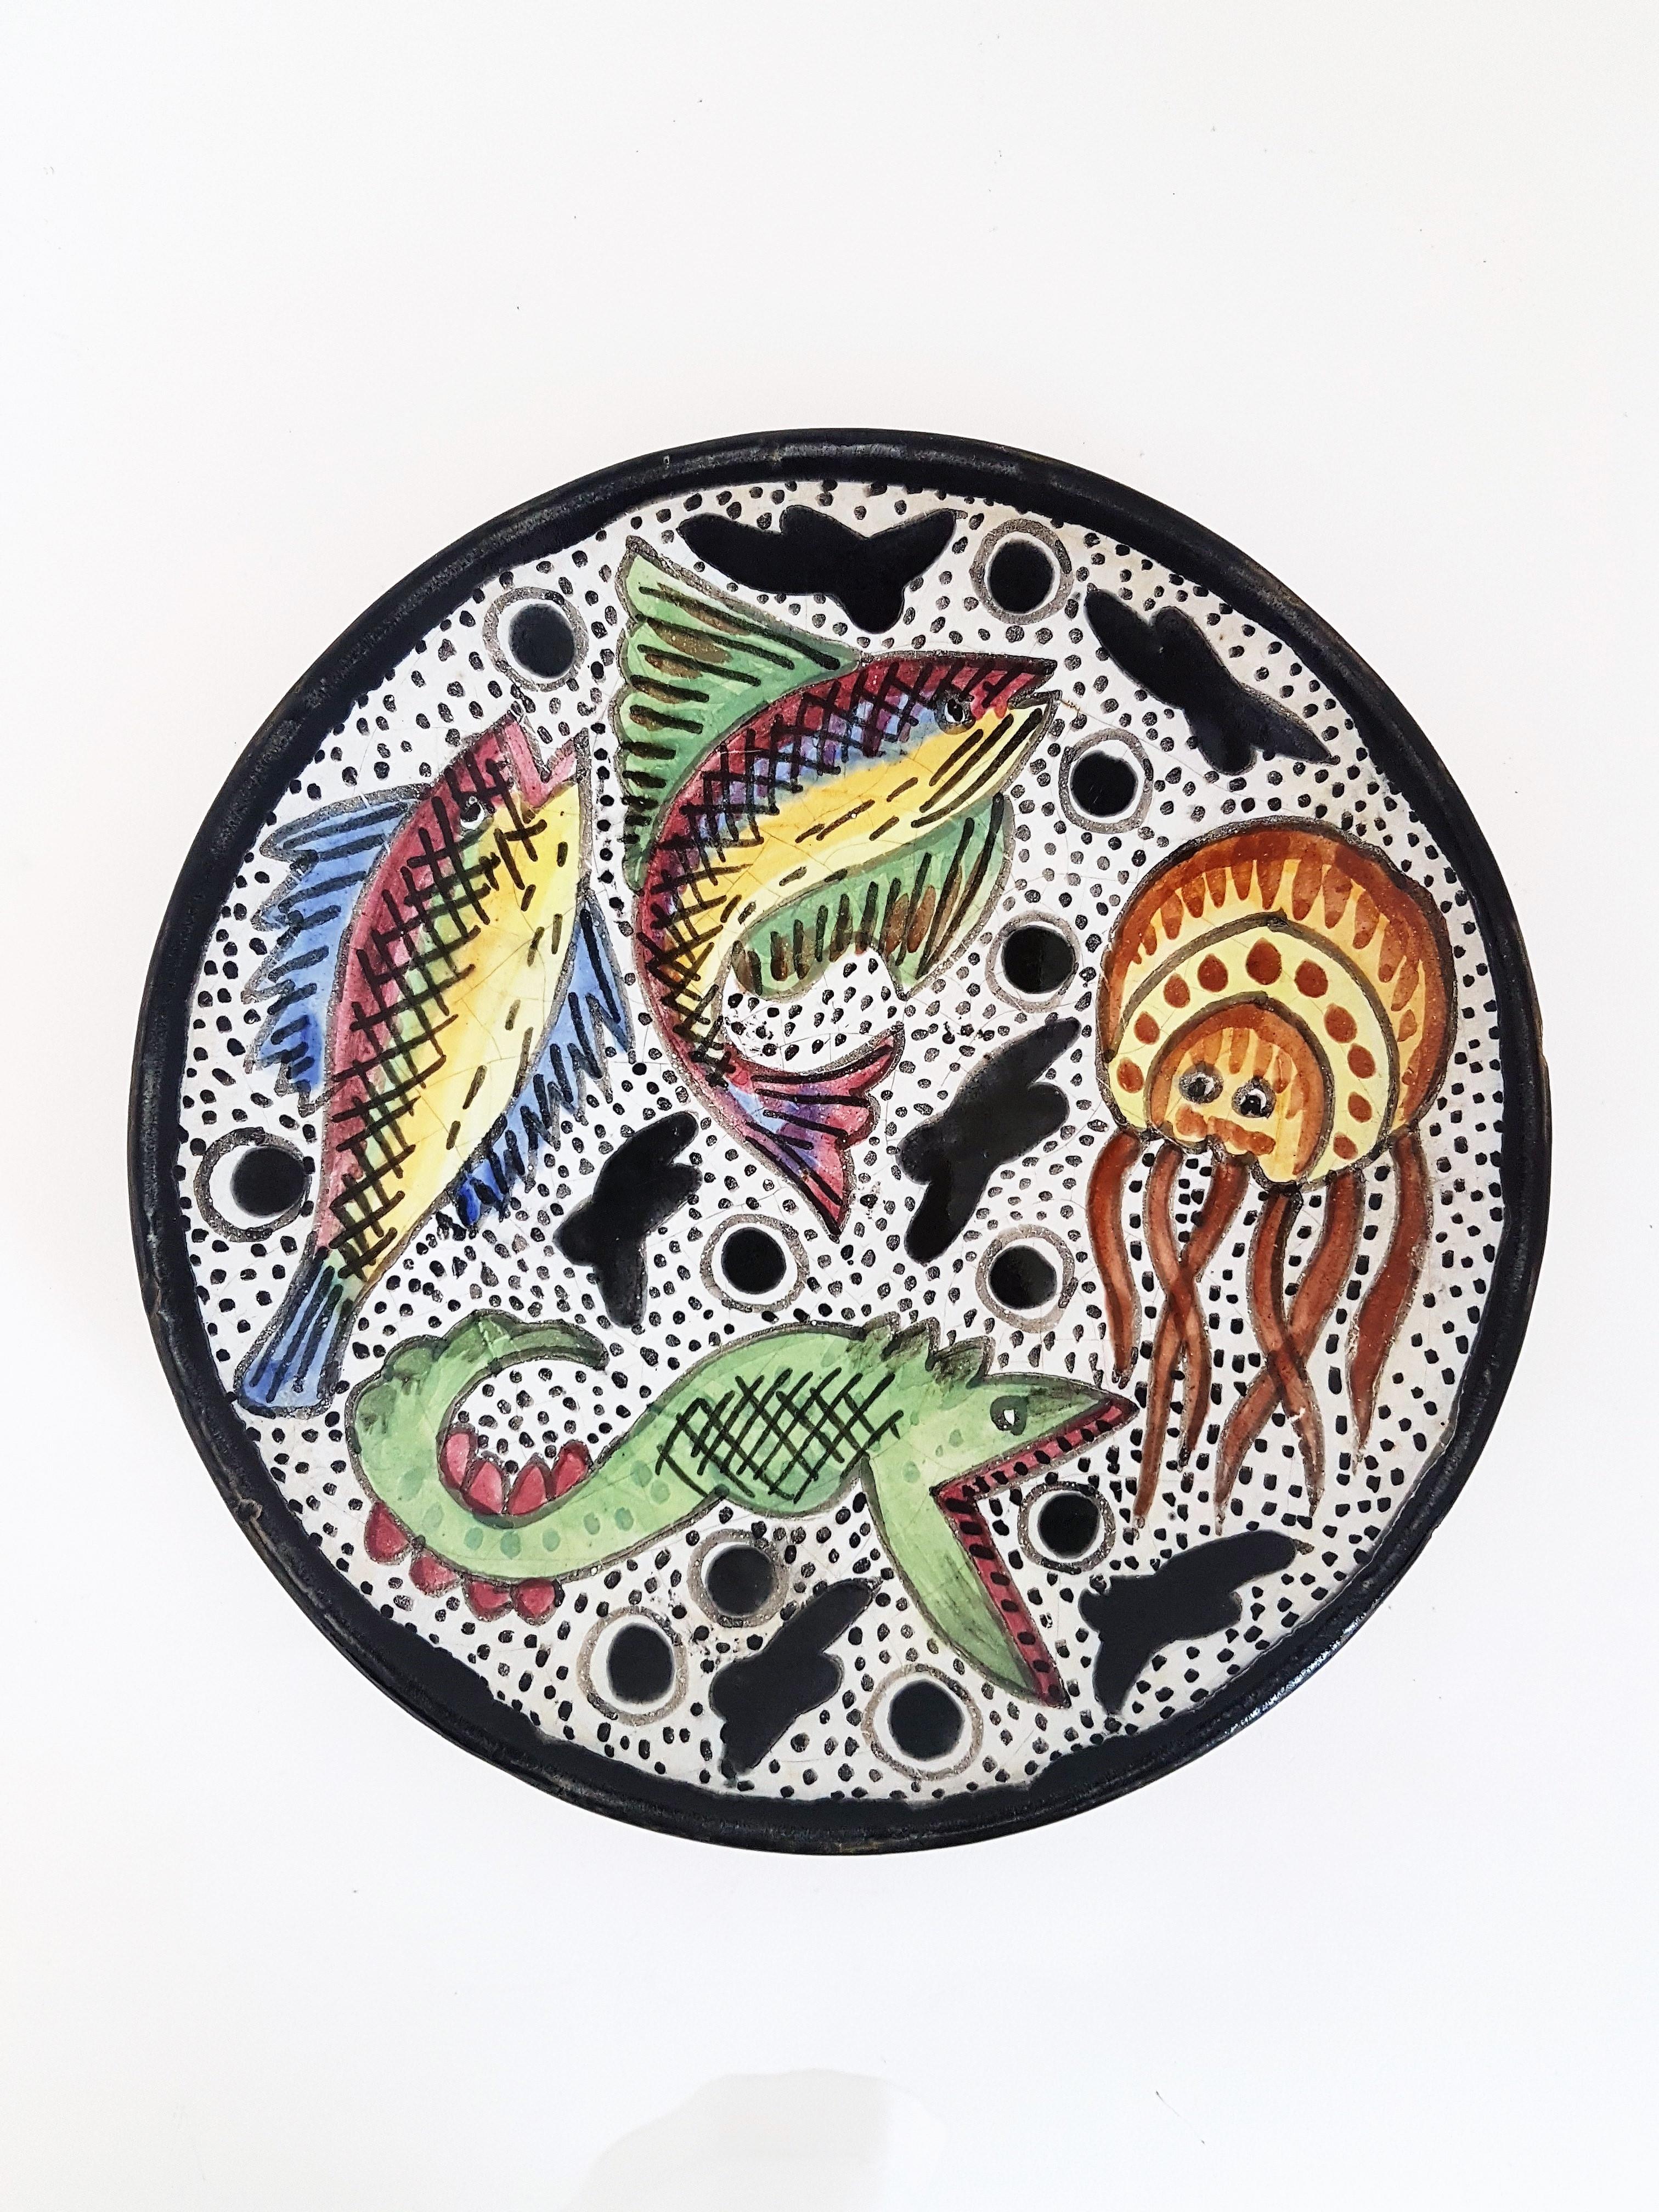 Hand-Painted Spanish Ceramic Wall Plate Fishes Design, 1950s For Sale